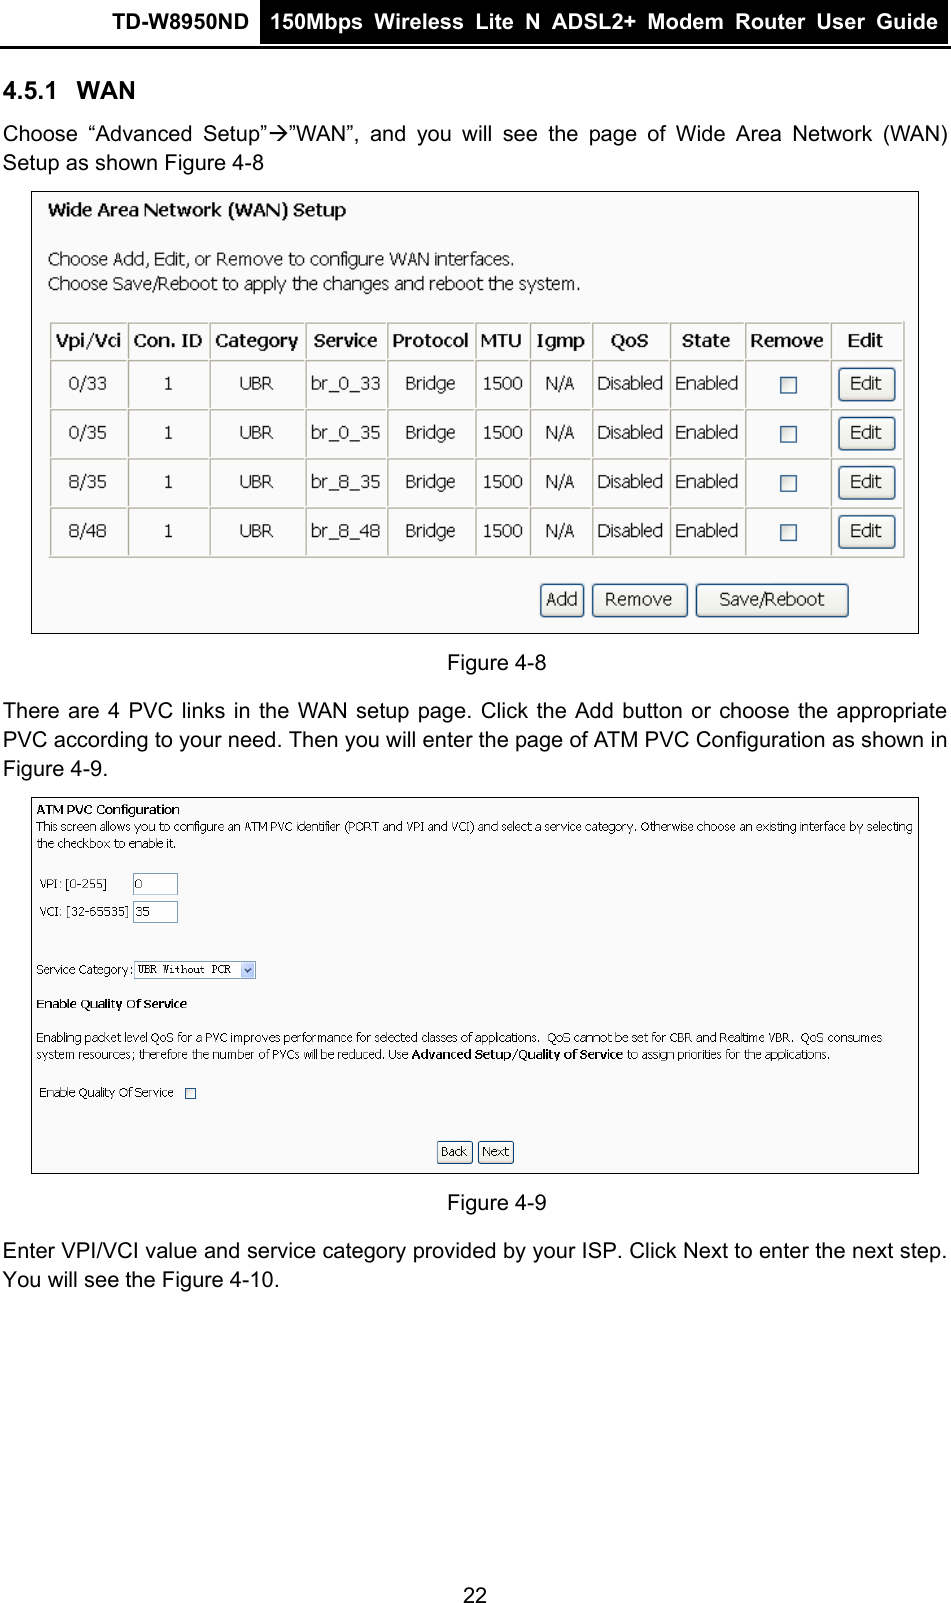 TD-W8950ND  150Mbps Wireless Lite N ADSL2+ Modem Router User Guide  4.5.1  WAN Choose “Advanced Setup”Æ”WAN”, and you will see the page of Wide Area Network (WAN) Setup as shown Figure 4-8  Figure 4-8 e WAN setup page. Click the Add button or choose the appropriate PVC according to your need. Then you will enter the page of ATM PVC Configuration as shown in Figure 4-9. There are 4 PVC links in th Figure 4-9 Enter VPI/VCI value and service category provided by your ISP. Click Next to enter the next step. You will see the Figure 4-10. 22 